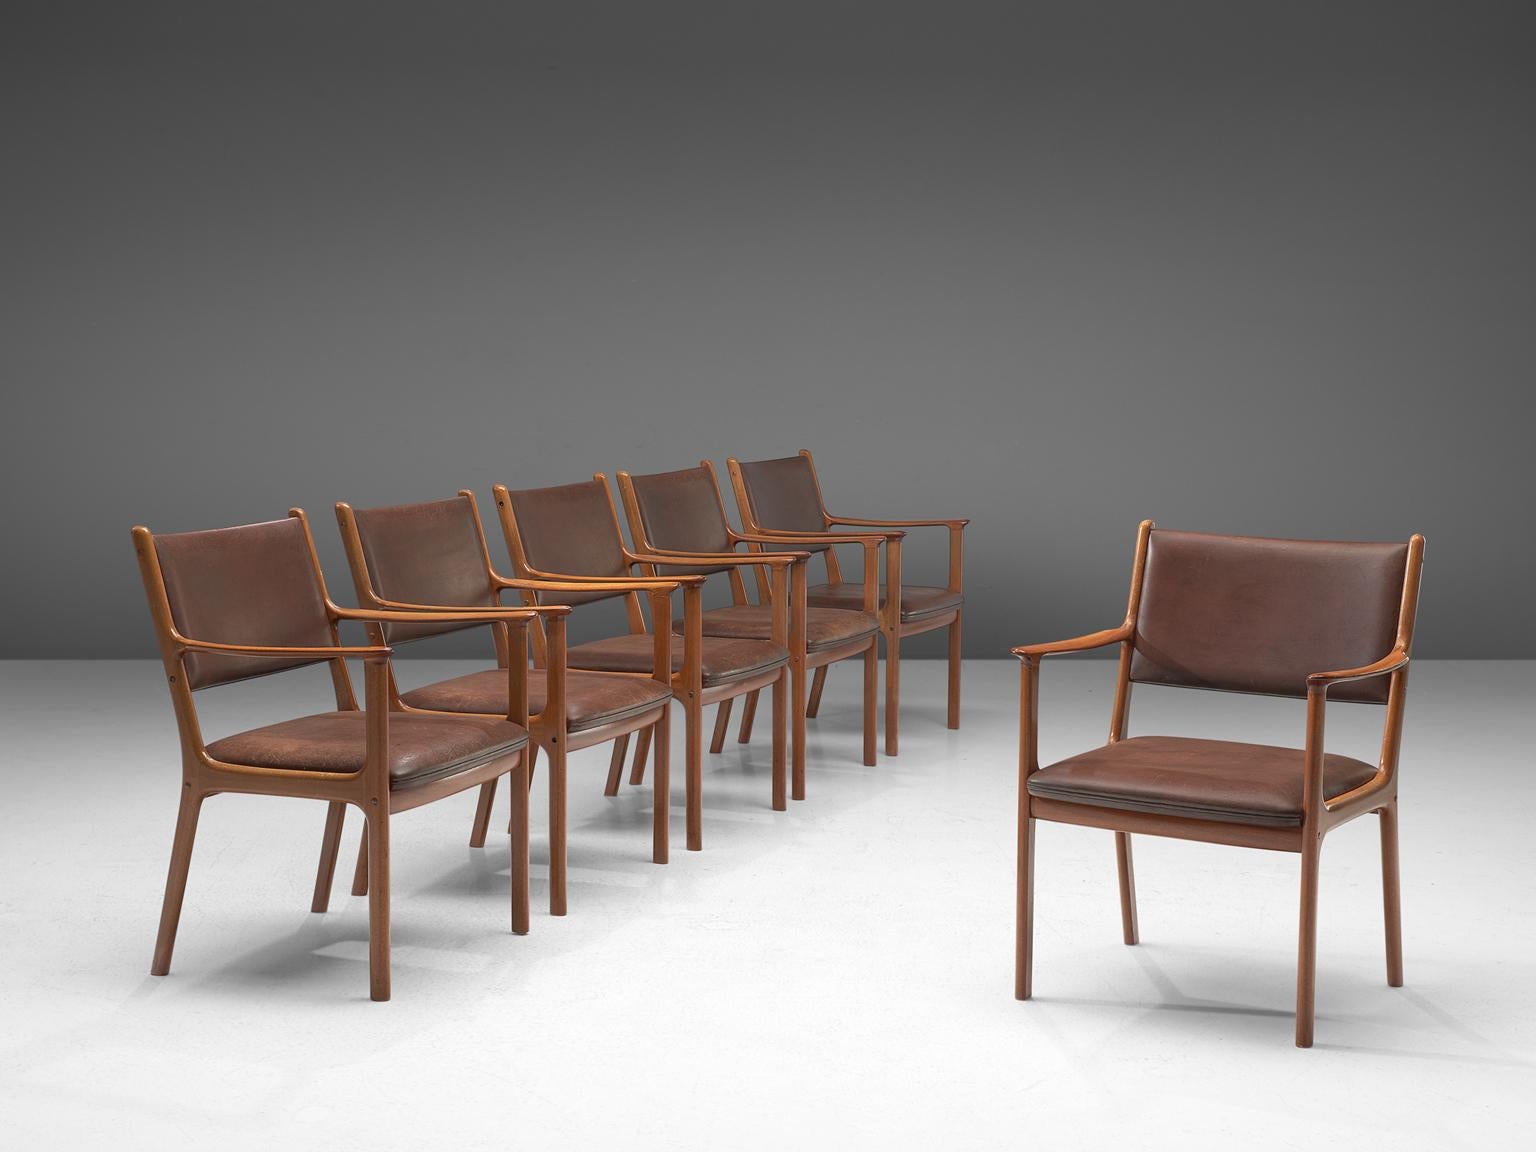 Ole Wanscher for P . Jeppesens Møbelfabrik, set of six armchairs model 'PJ412', mahogany and leather, Denmark, 1960s

Modest en simplistic set of dining chairs designed by Ole Wanscher in the 1960s. These chairs are very comfortable thanks to the